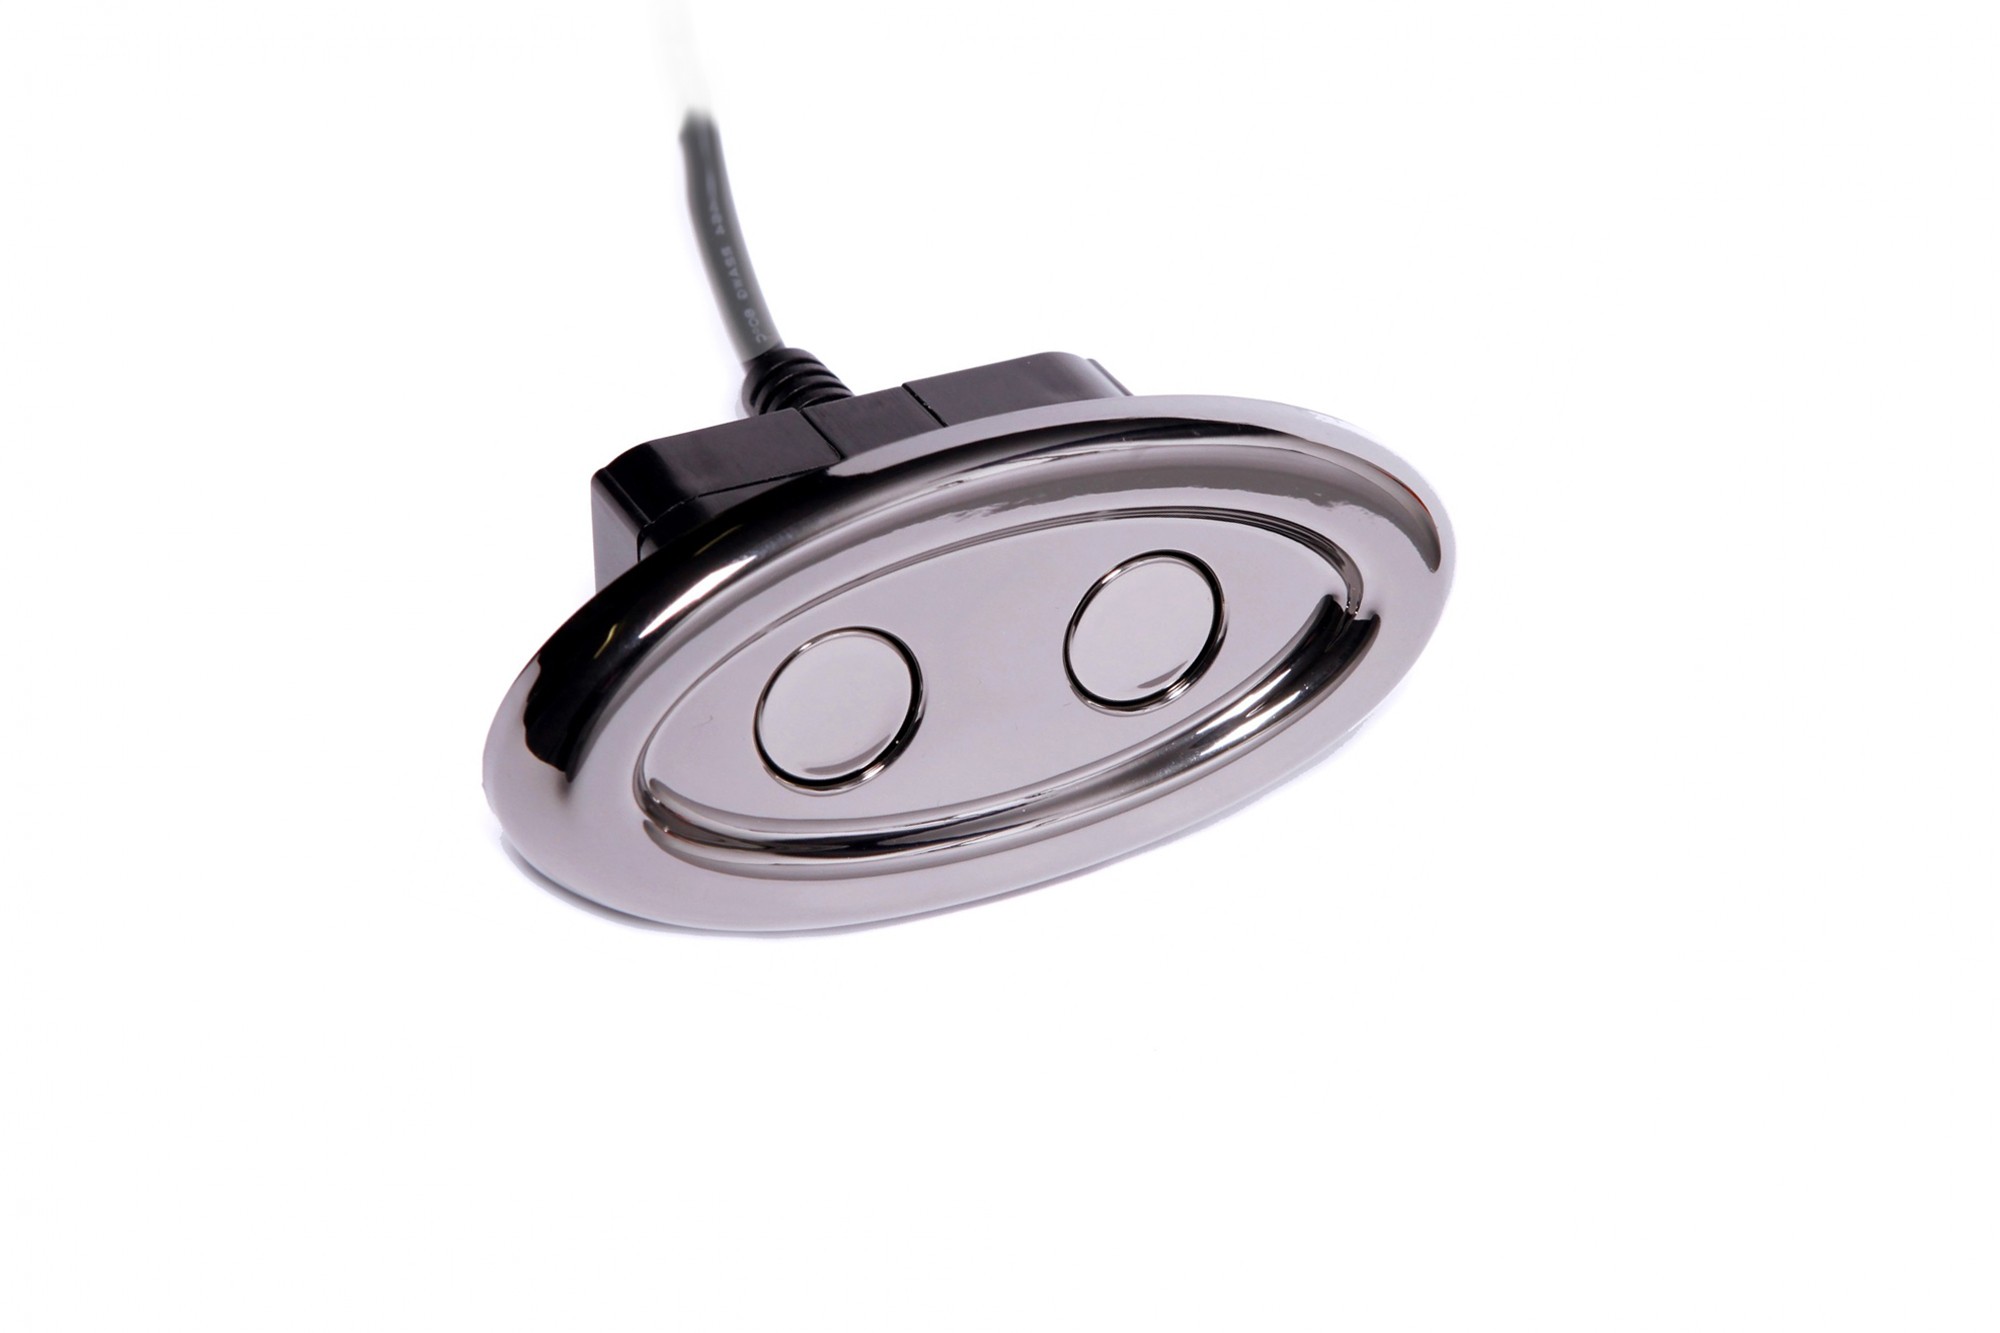 2-Button Oval Power Recline Switch in Black Chrome Finish